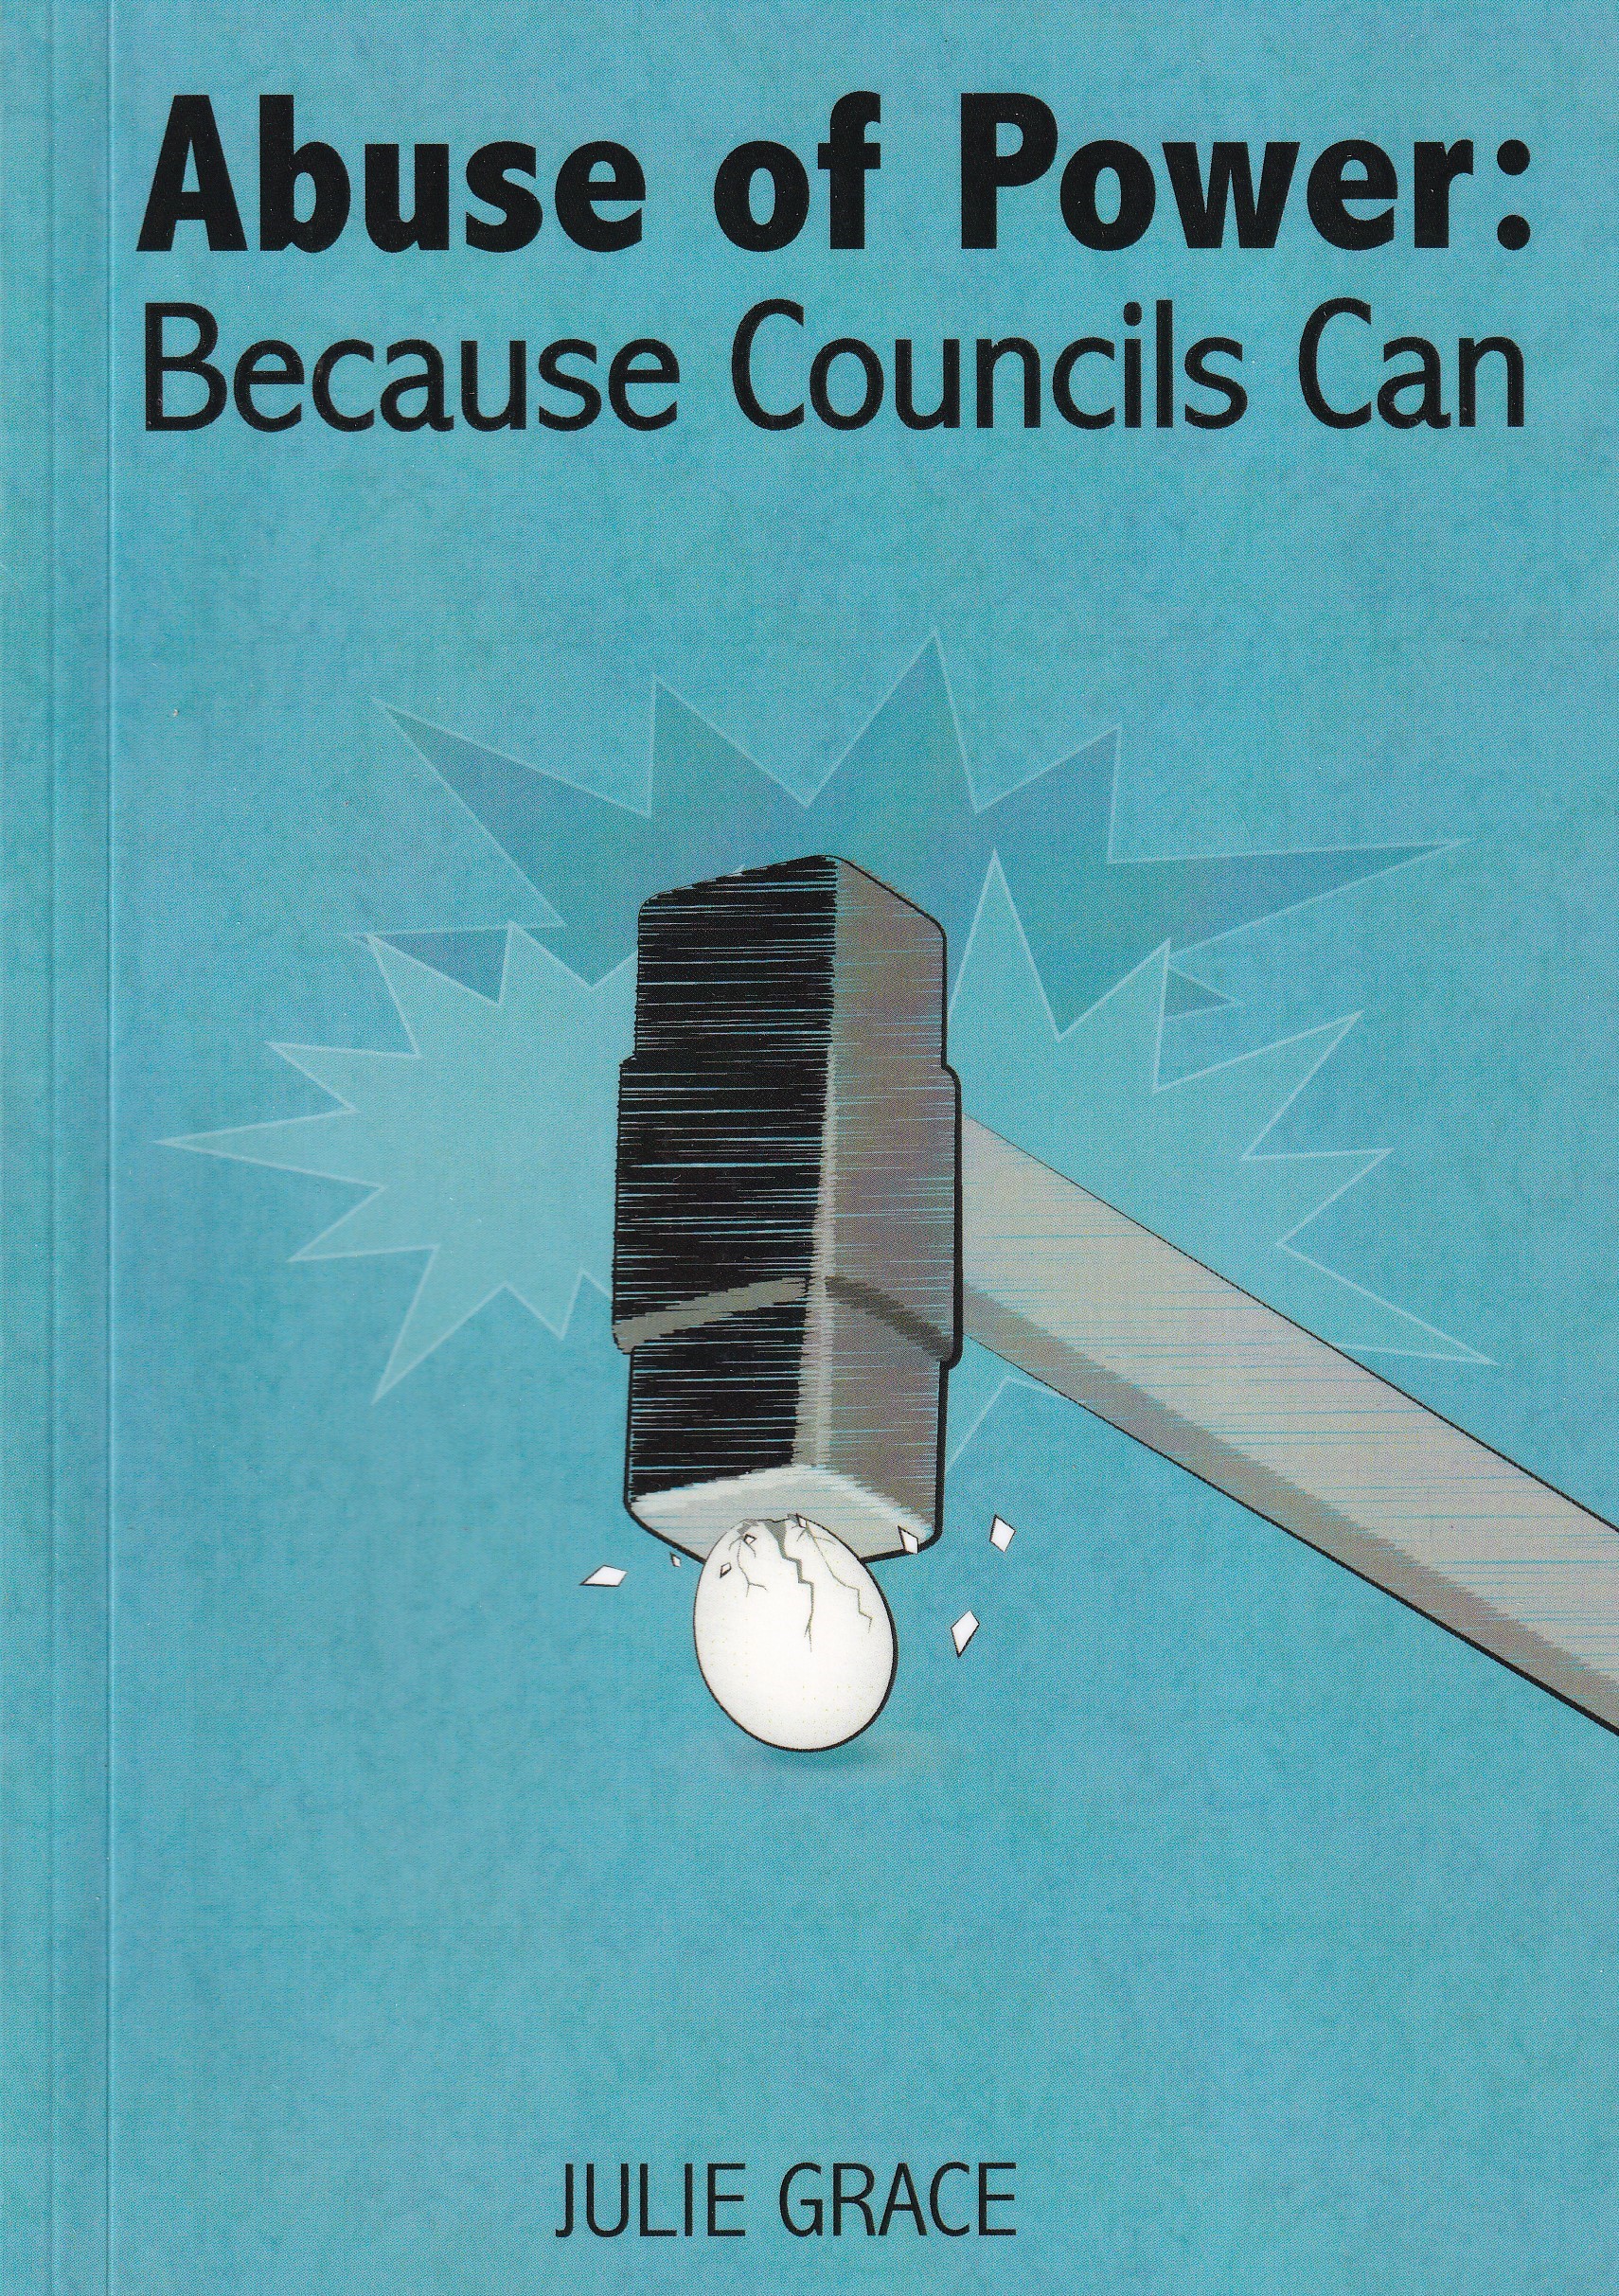 Abuse of Power: Because Councils Can by Julie Grace